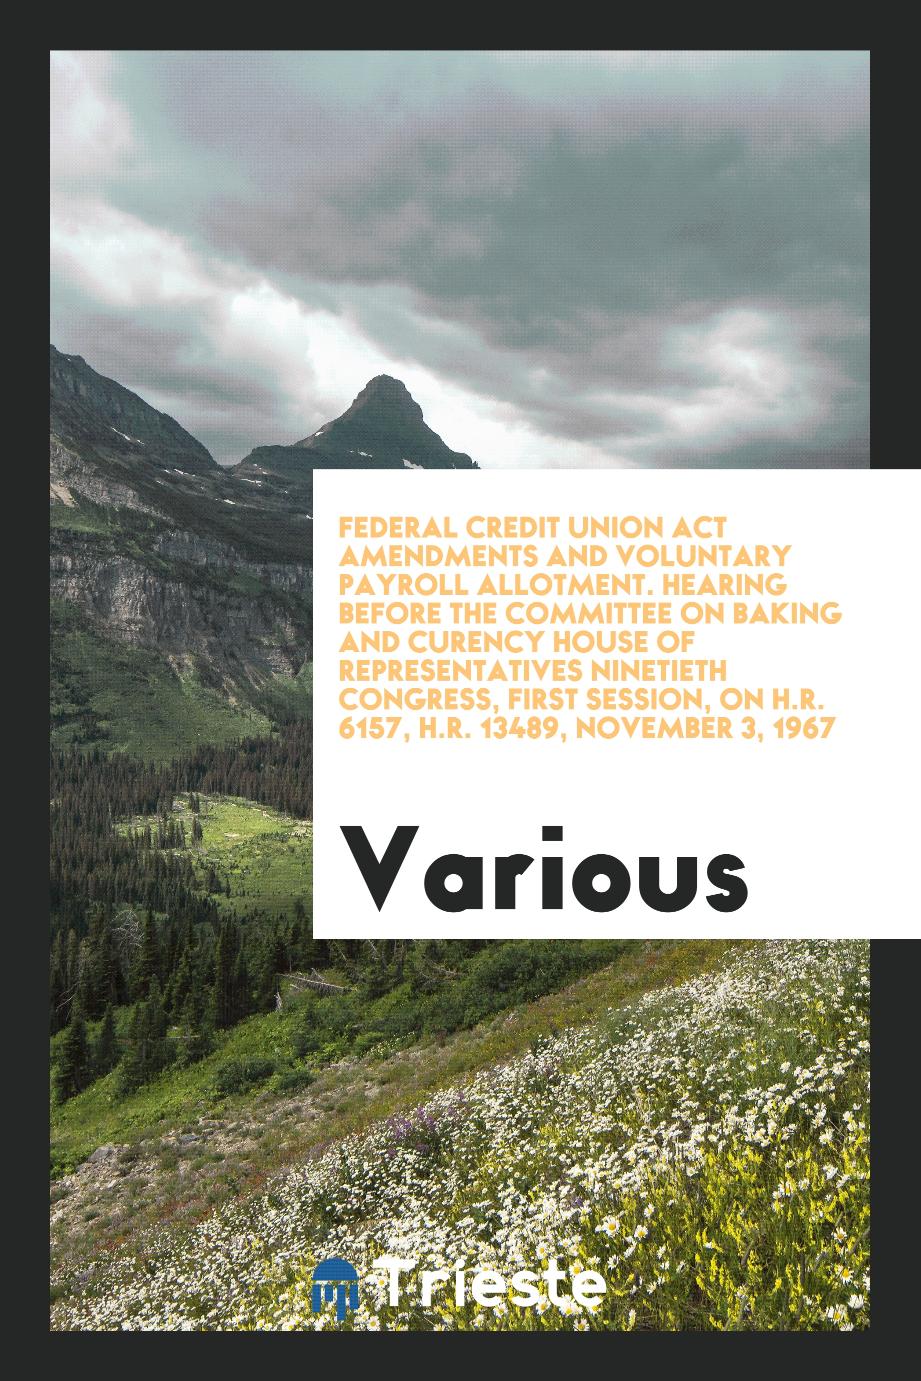 Federal credit union act amendments and voluntary payroll allotment. Hearing before the committee on baking and curency house of representatives Ninetieth Congress, first session, on H.R. 6157, H.R. 13489, November 3, 1967